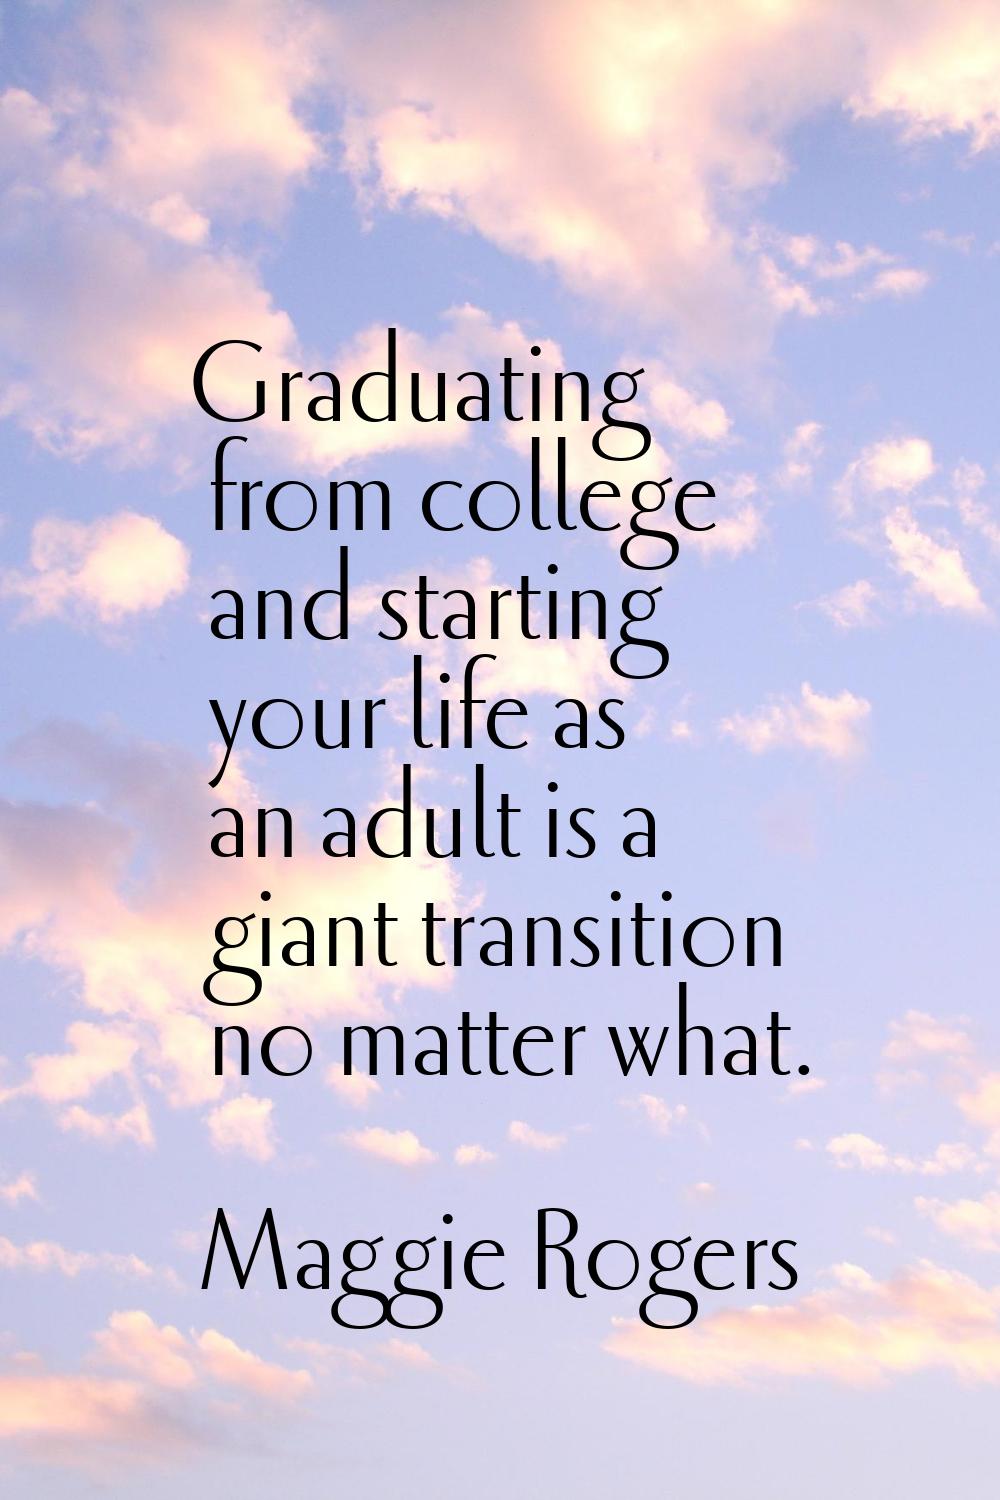 Graduating from college and starting your life as an adult is a giant transition no matter what.